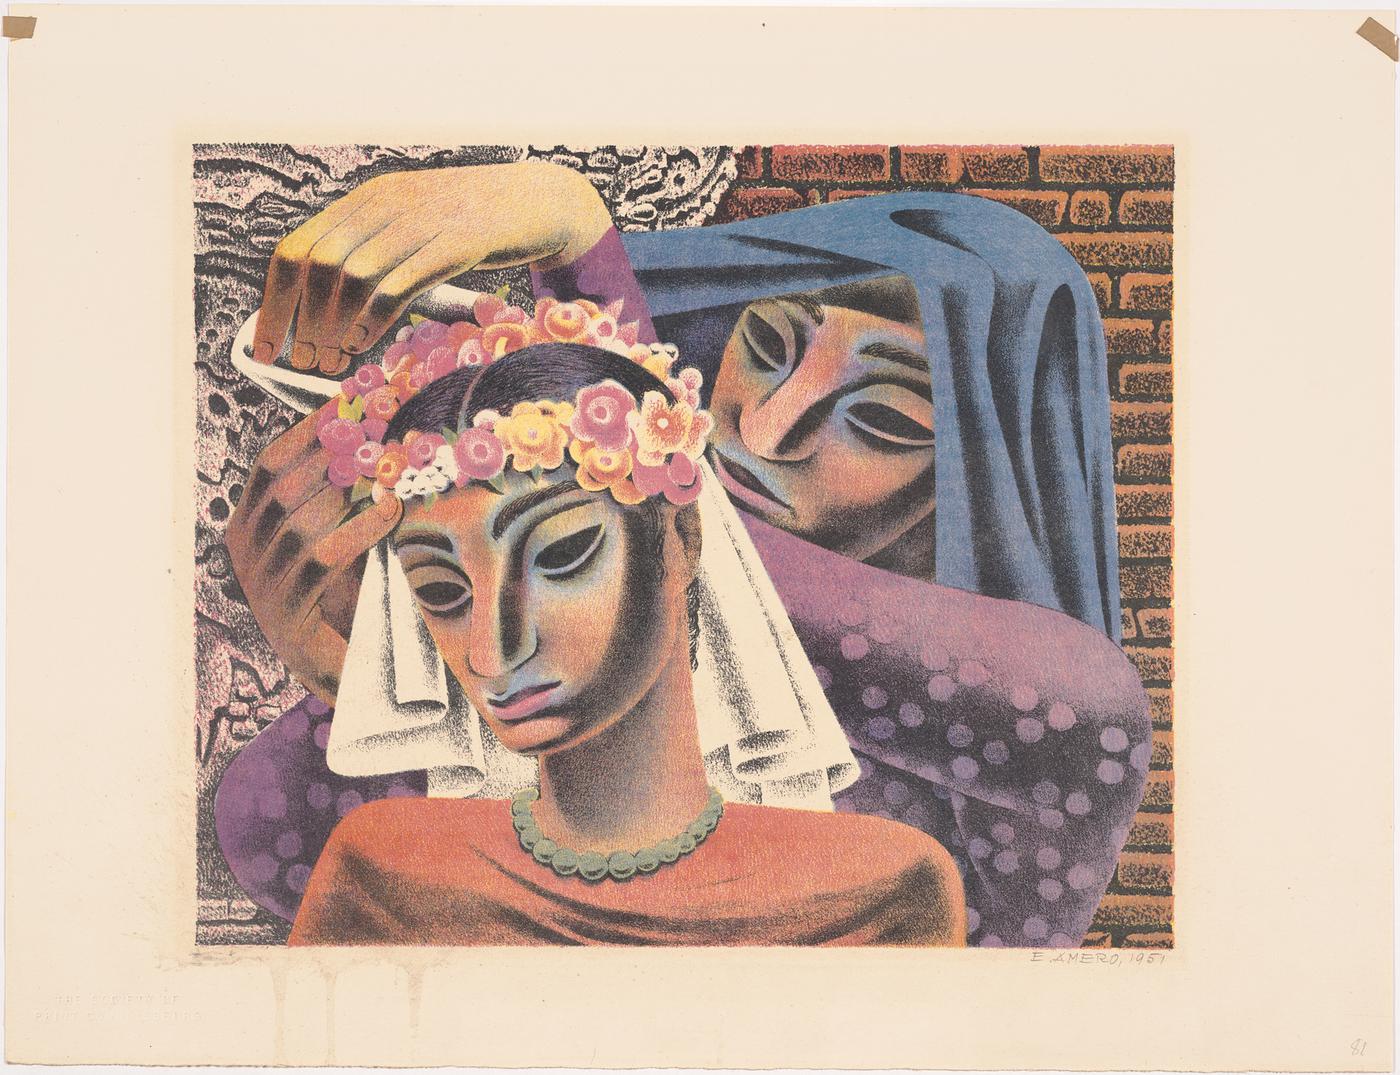 Image of two figures, one in purple with a blue headdress placing a flower crown on a person in the foreground